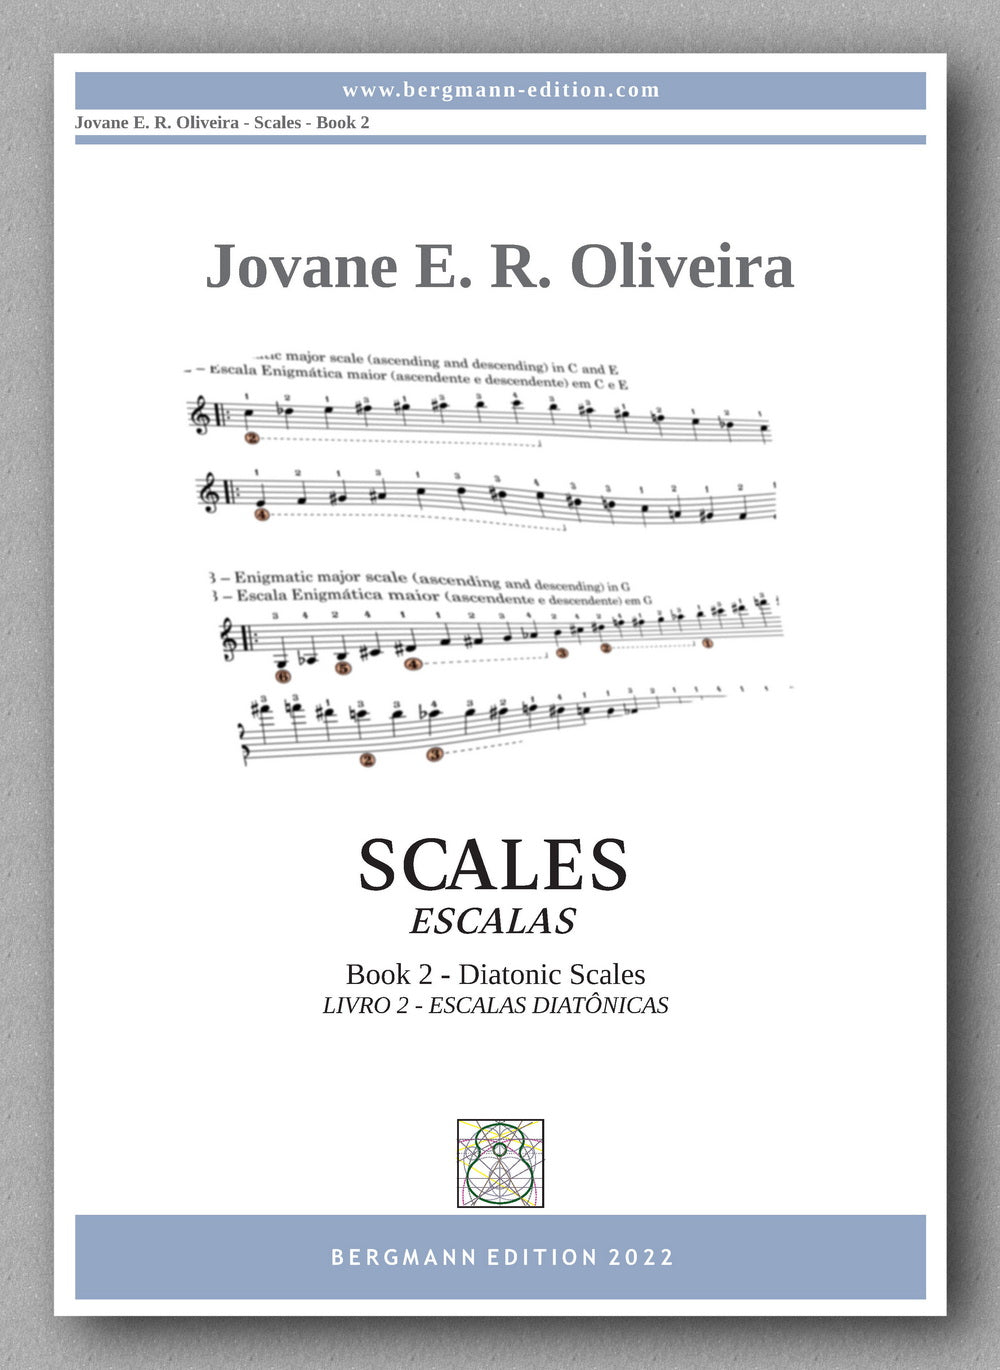 Scales, Book 2 - Diatonic Scales, by Jovane E.R. Oliveira - Cover